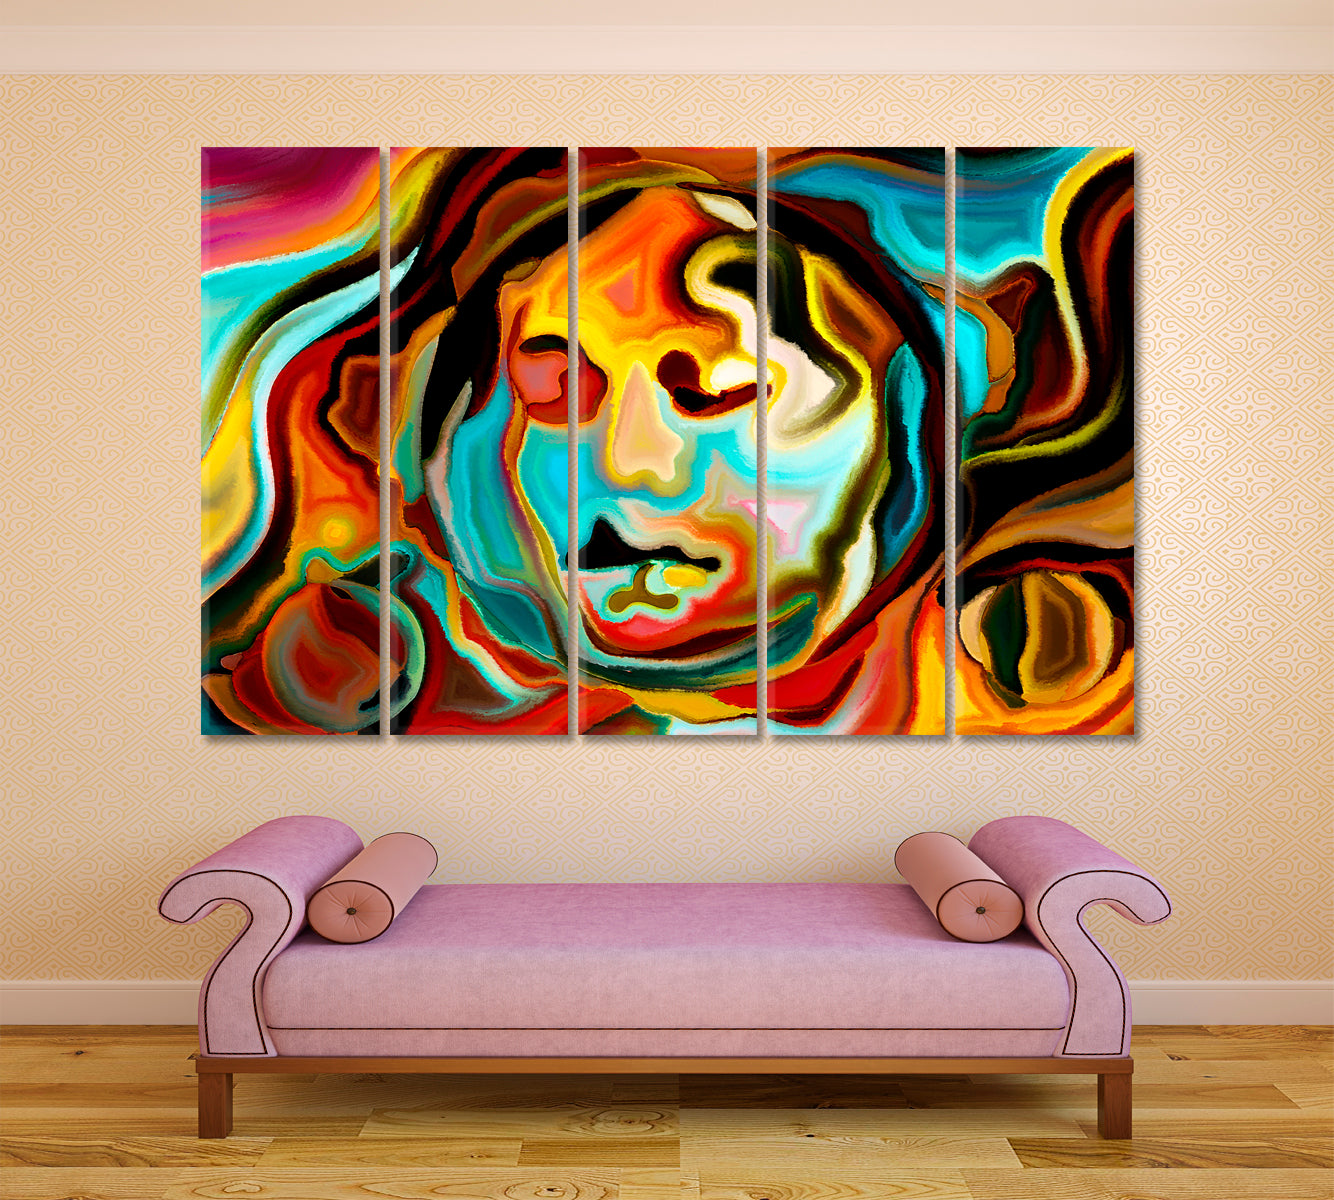 Composition of Human Features, Colors and Abstract Shapes Abstract Art Print Artesty 5 panels 36" x 24" 